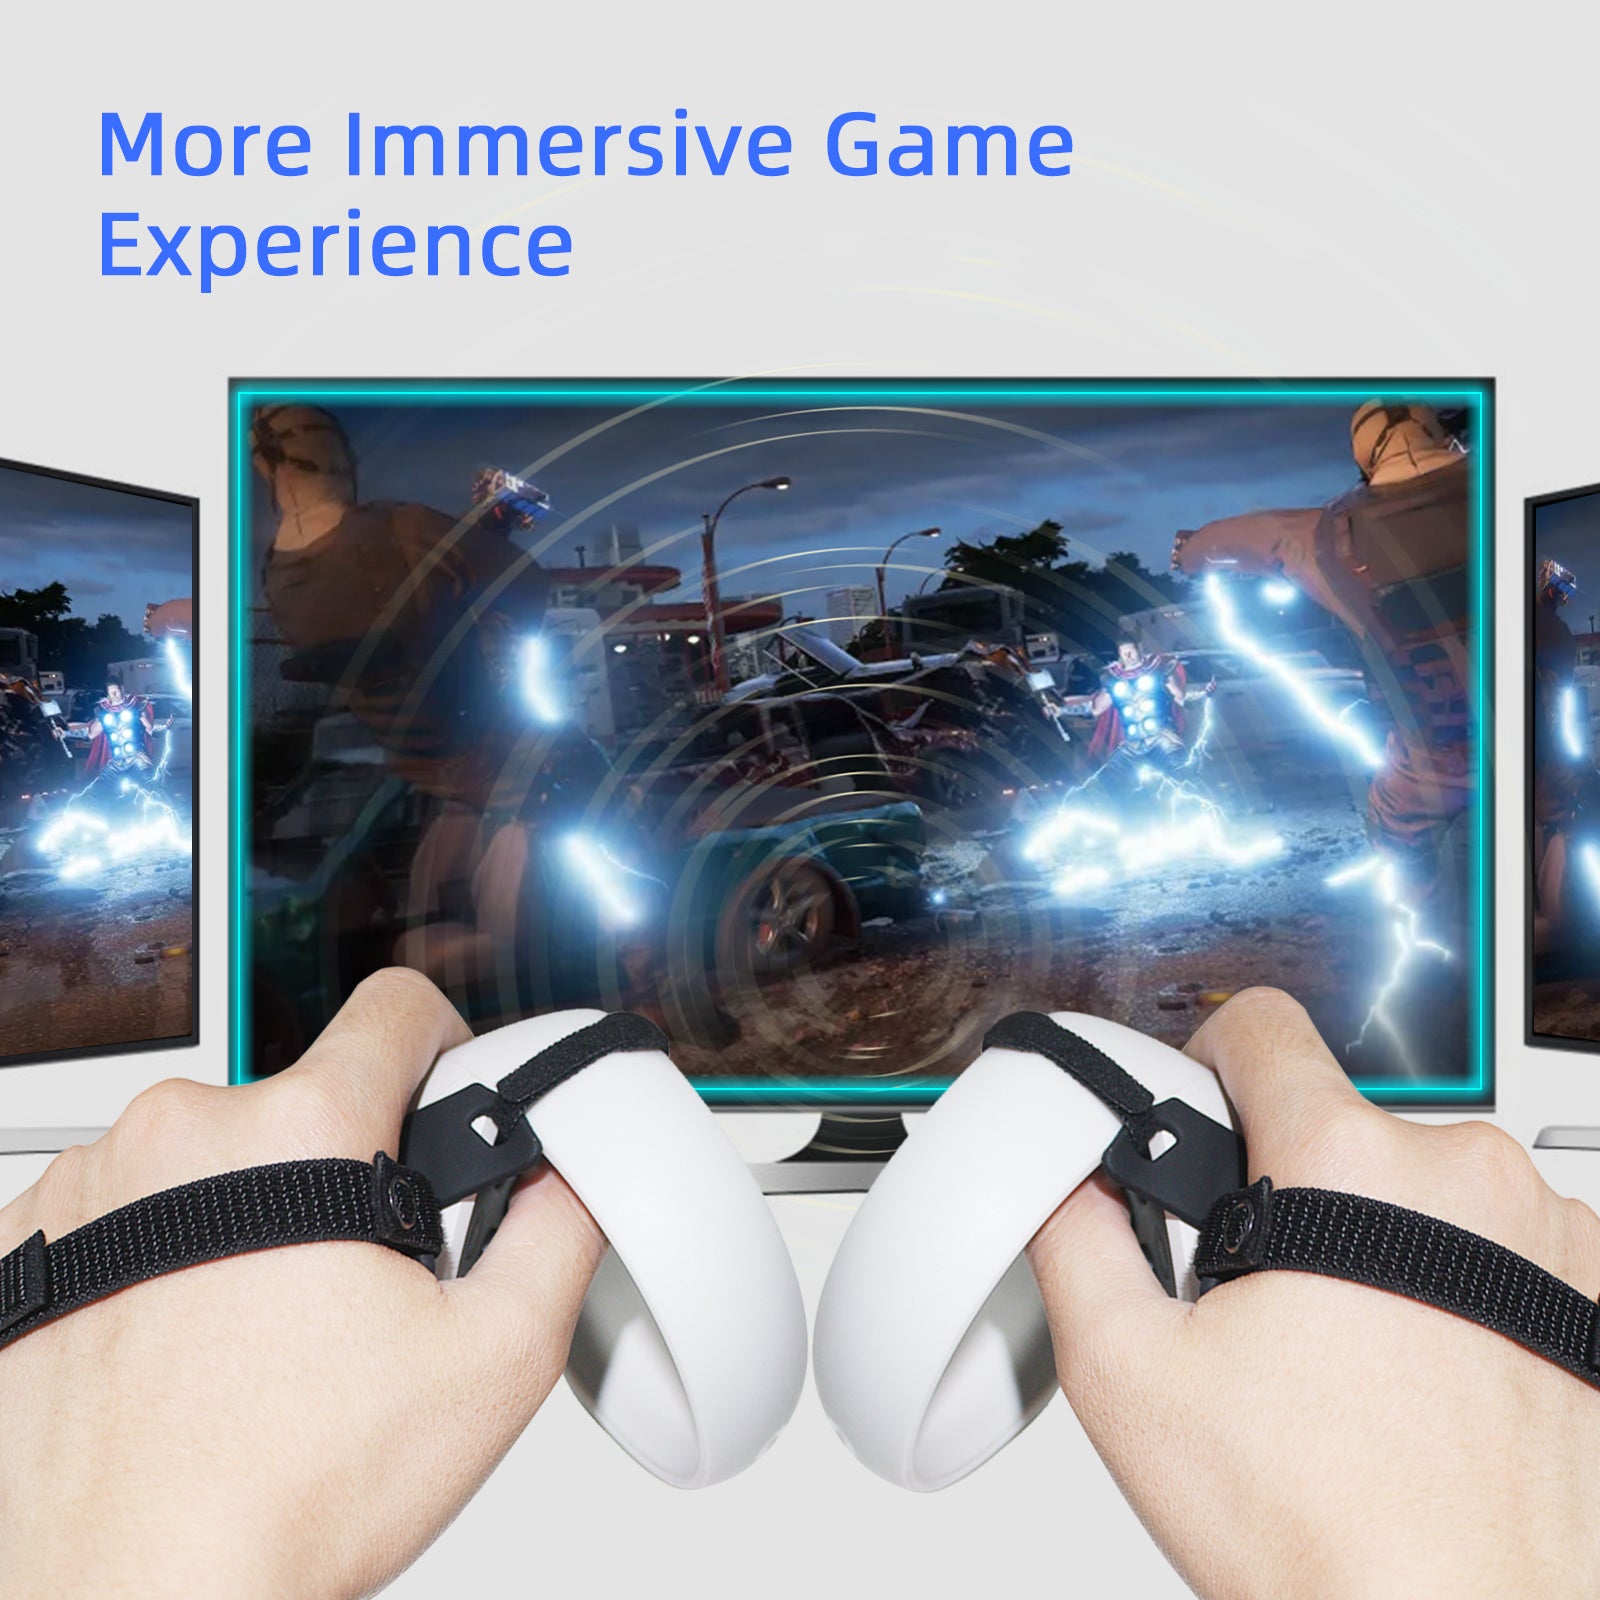 Enjoy an immersive gaming experience with VR controllers that have silicone covers.